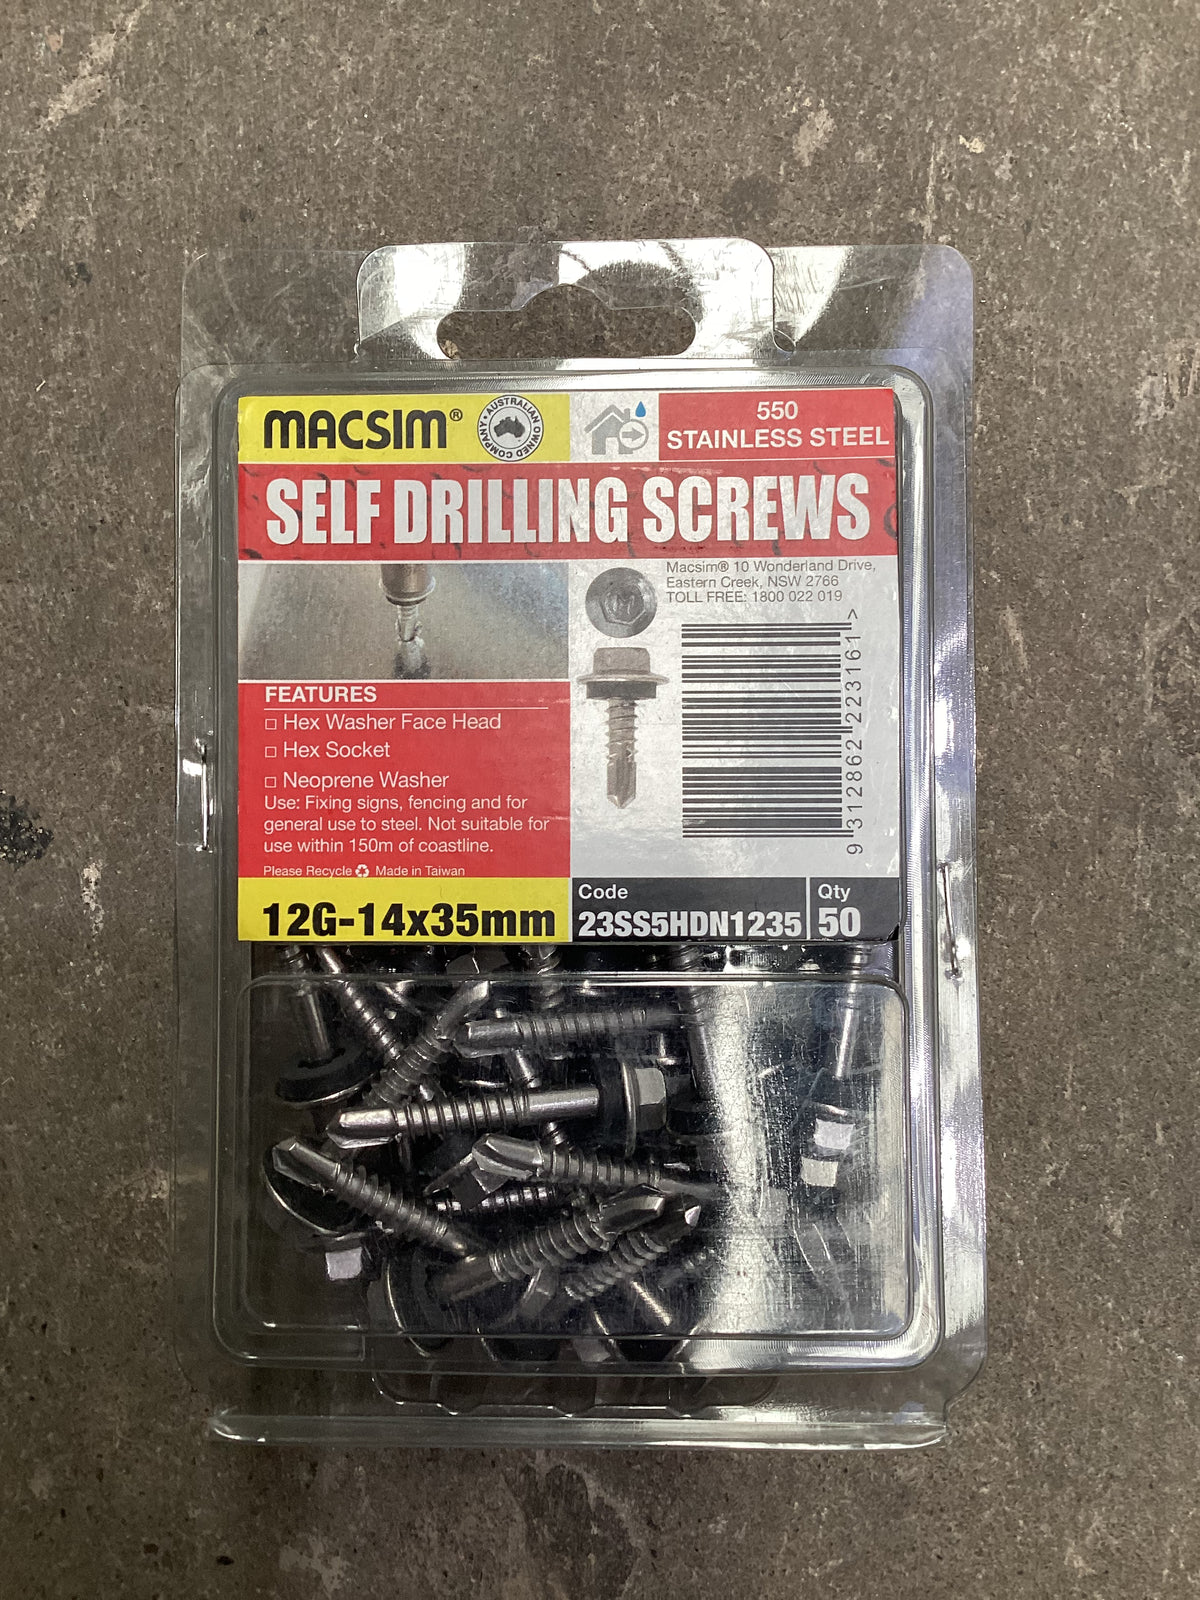 12G-14x35mm Self Drilling Screws - stainless hex washer face head